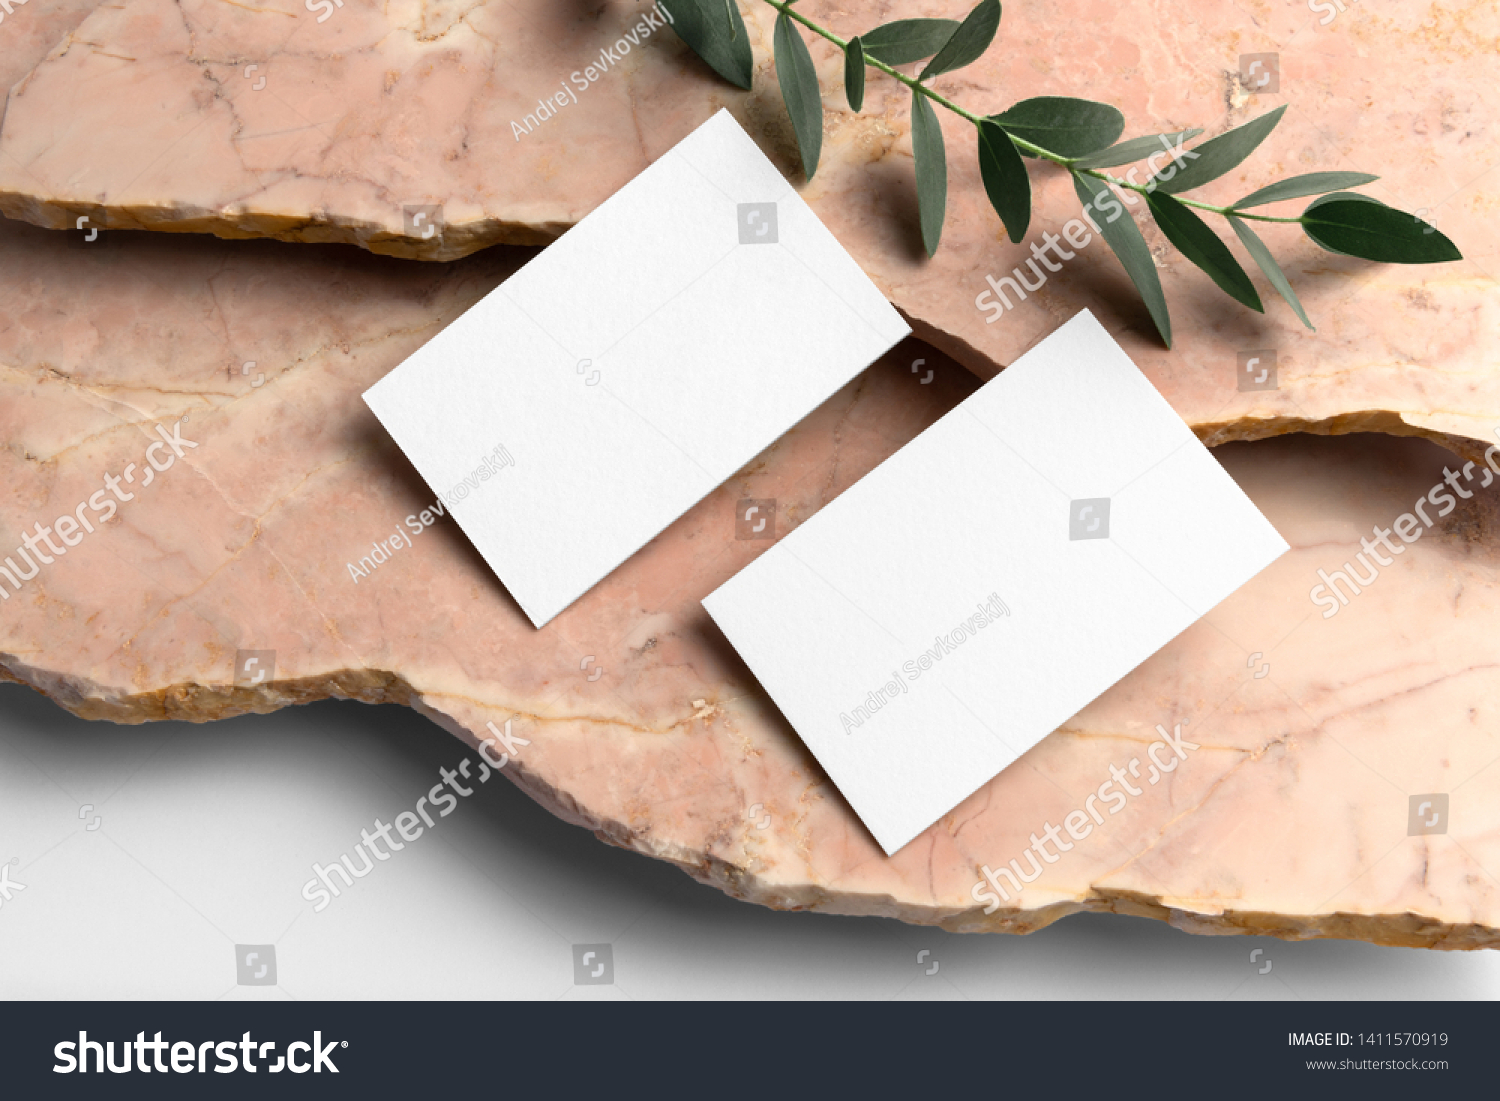 Real photo, business cards branding mockup template, isolated on light grey background, with marble and floral elements to place your design. #1411570919